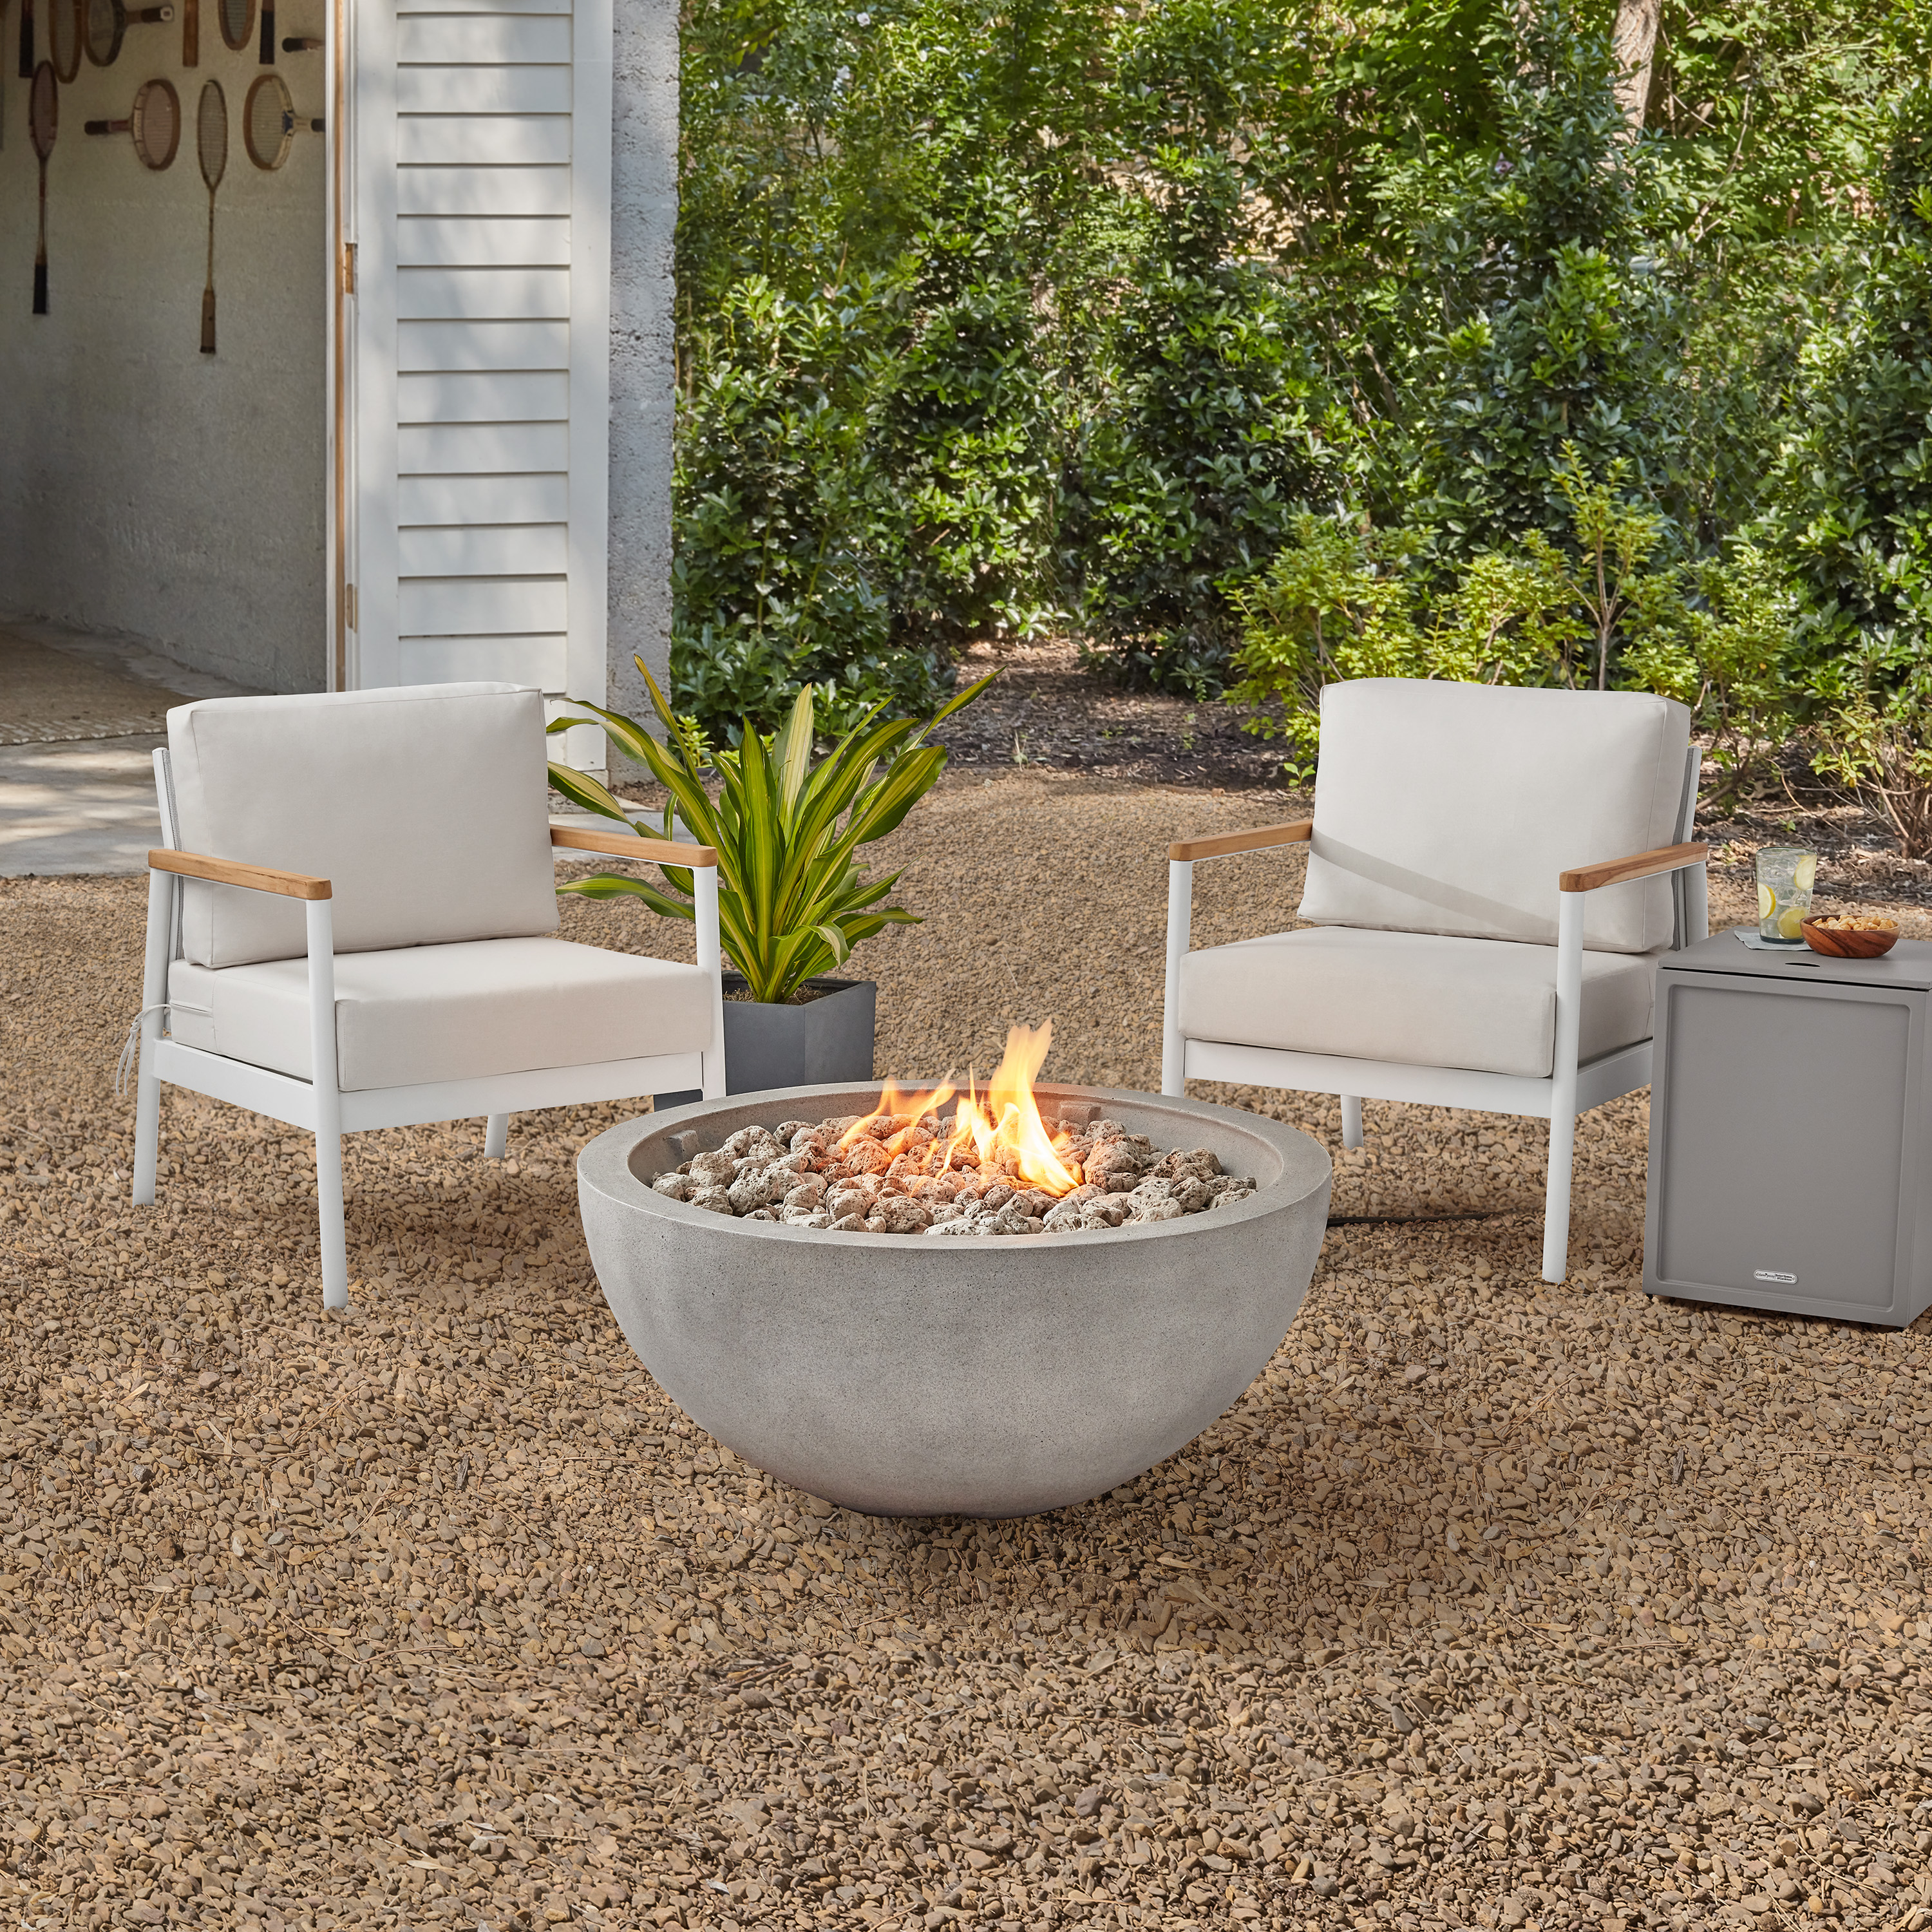 Better Homes & Gardens Wellsley 2-Piece Aluminum Outdoor Lounge Chairs Set by Dave & Jenny Marrs - image 2 of 9